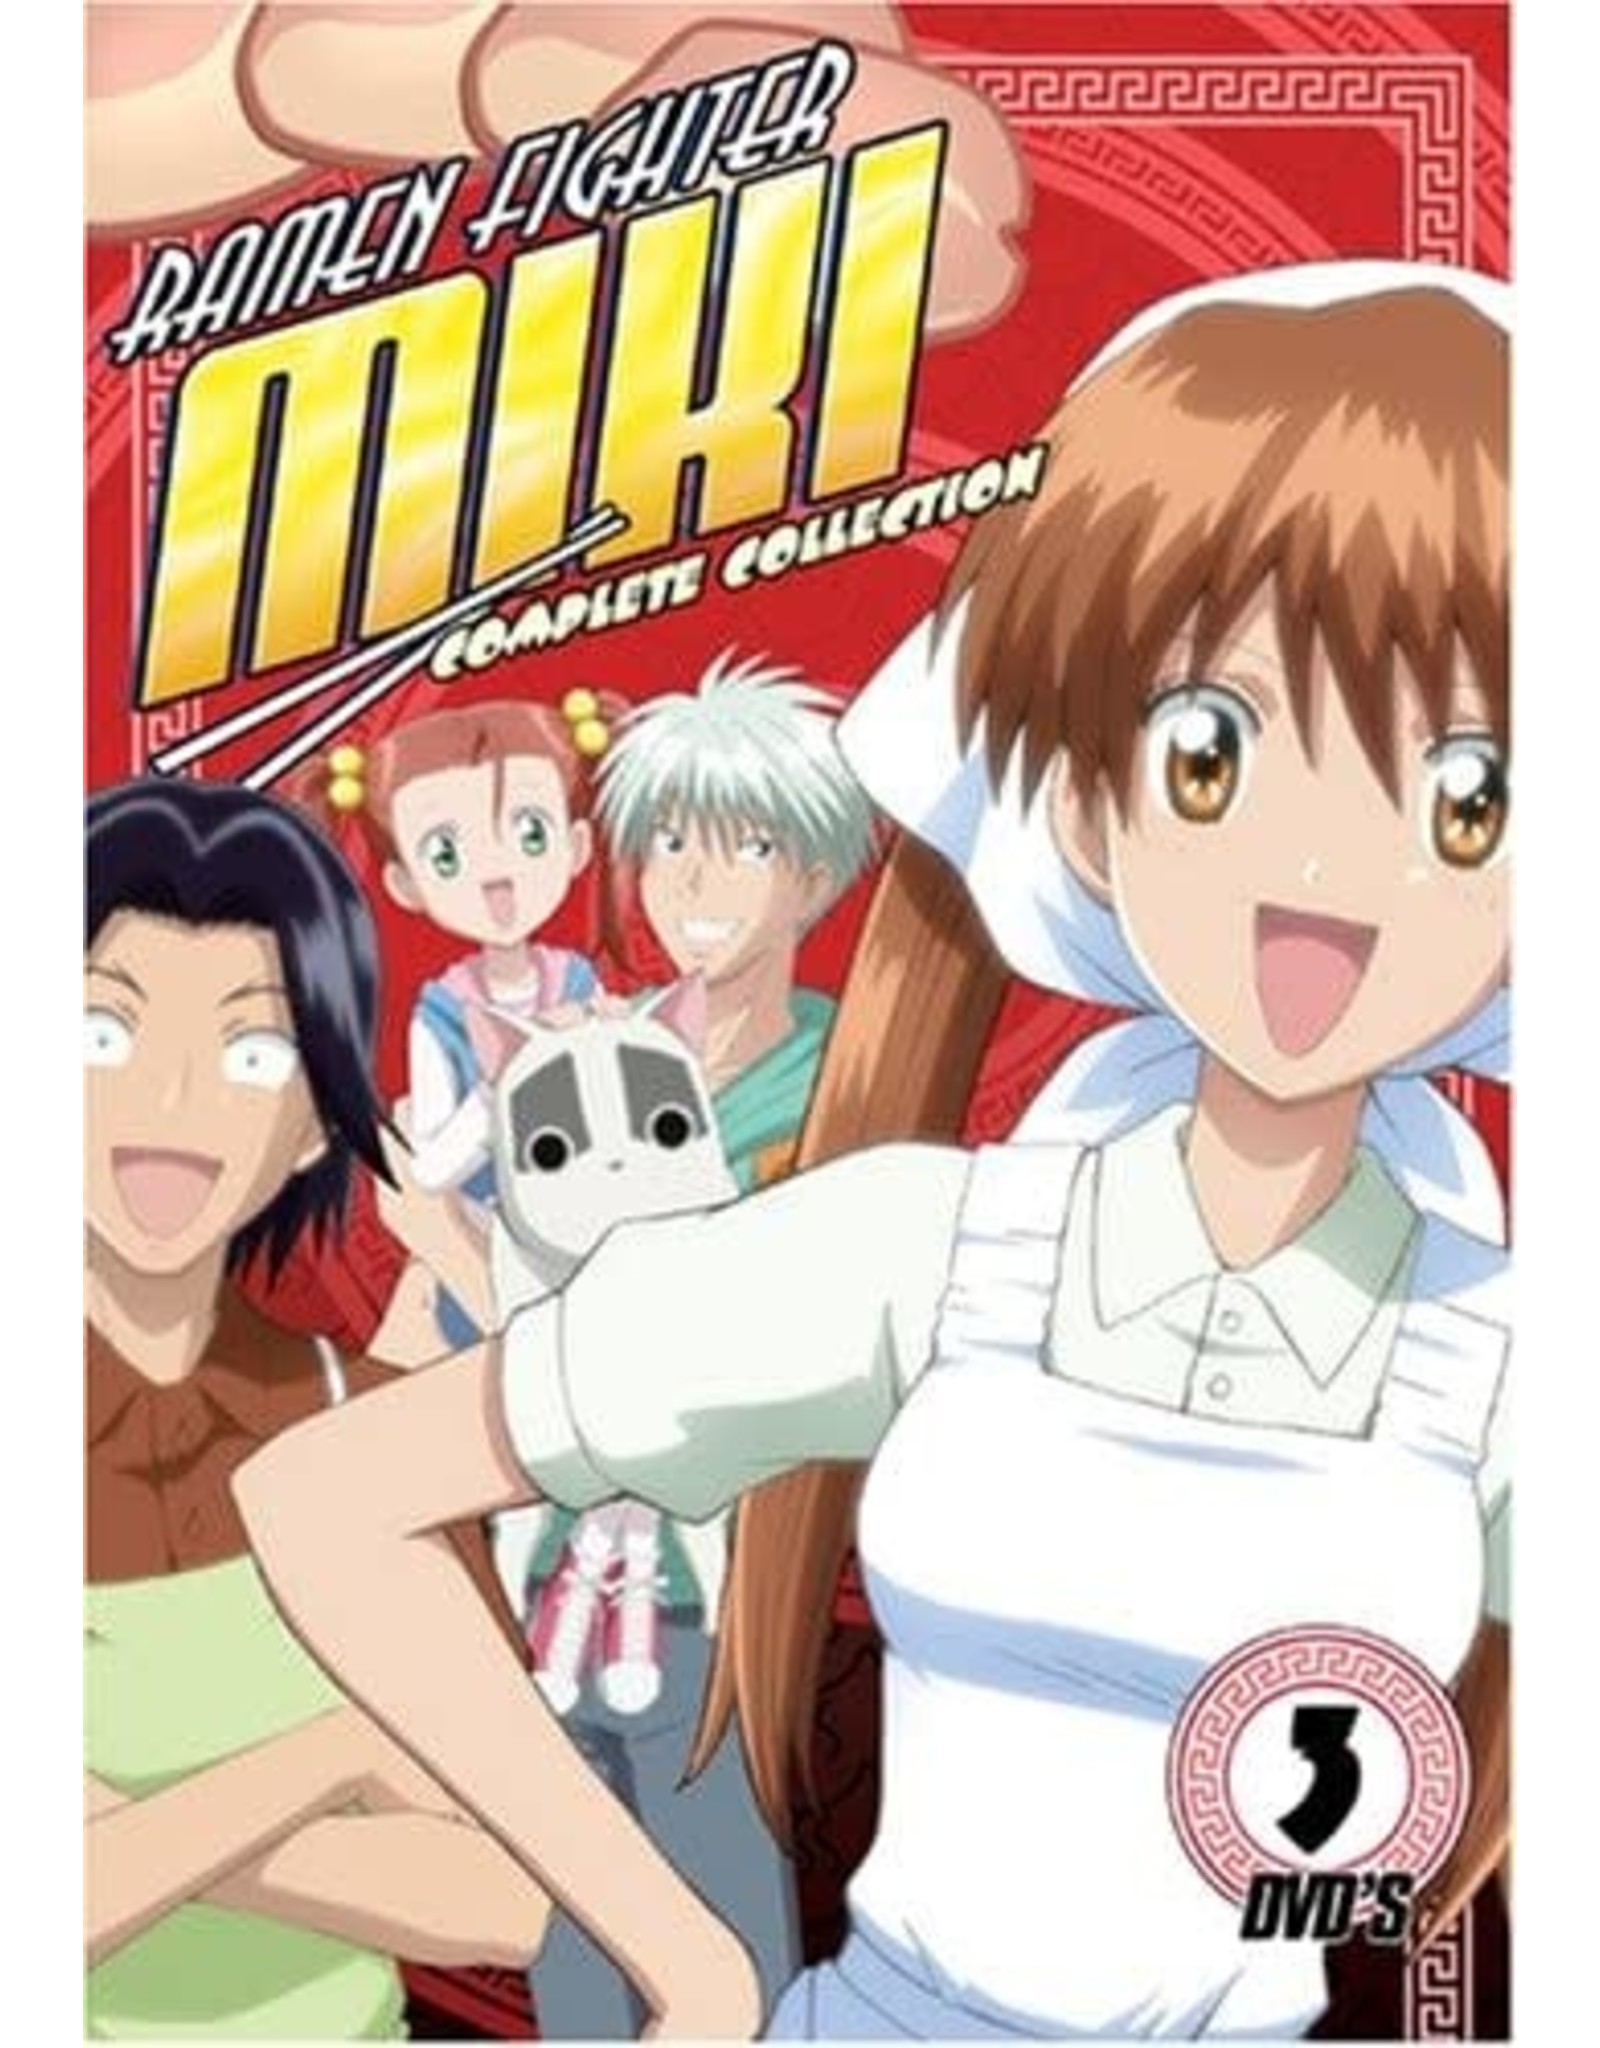 Anime & Animation Ramen Fighter Miki Complete Collection (USED)